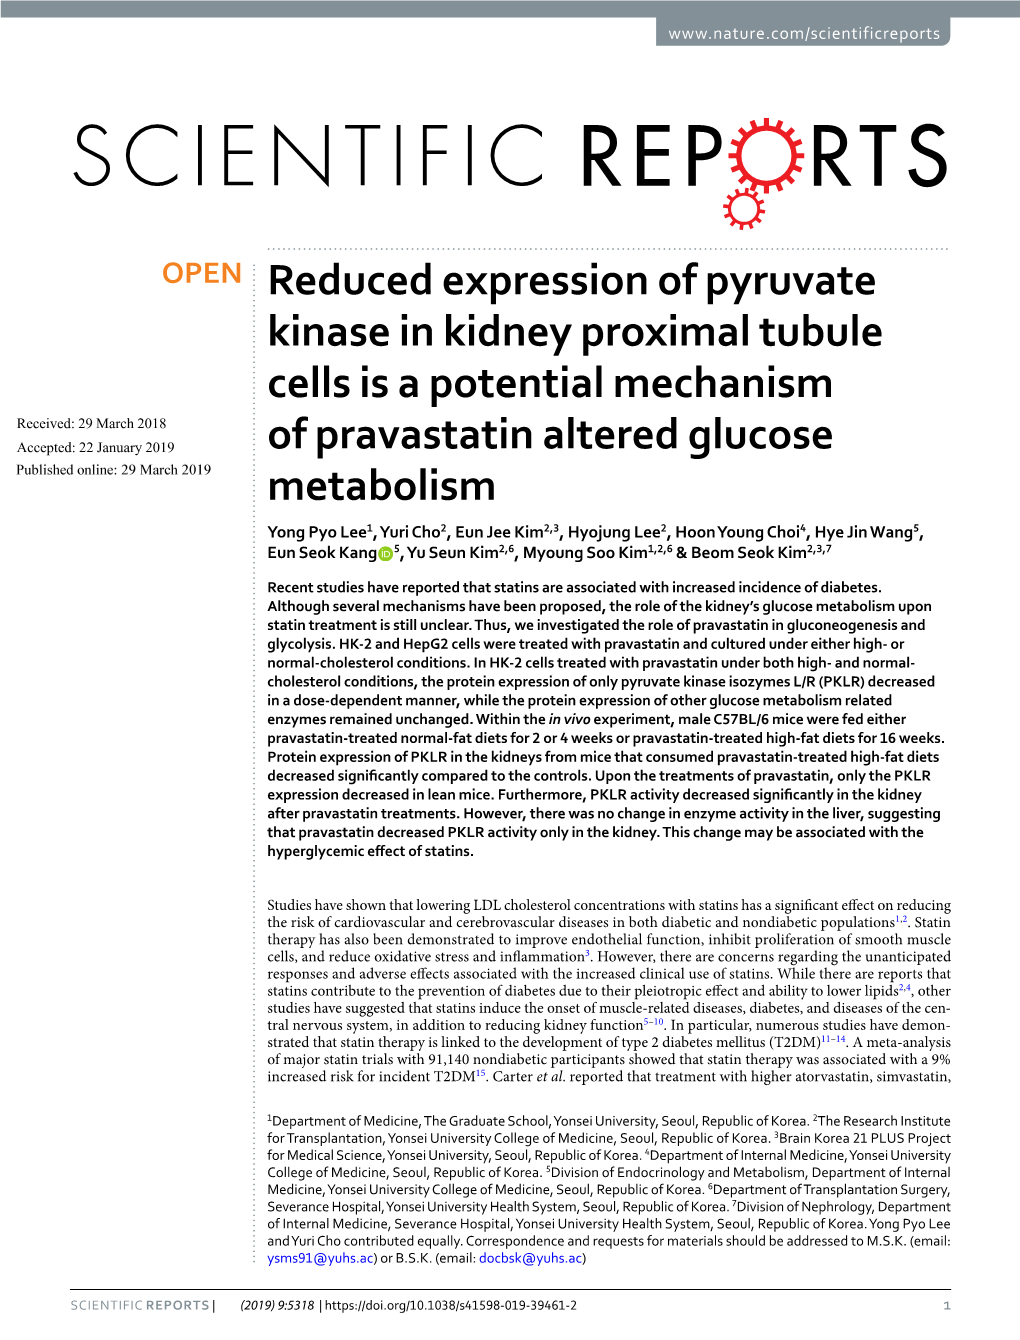 Reduced Expression of Pyruvate Kinase in Kidney Proximal Tubule